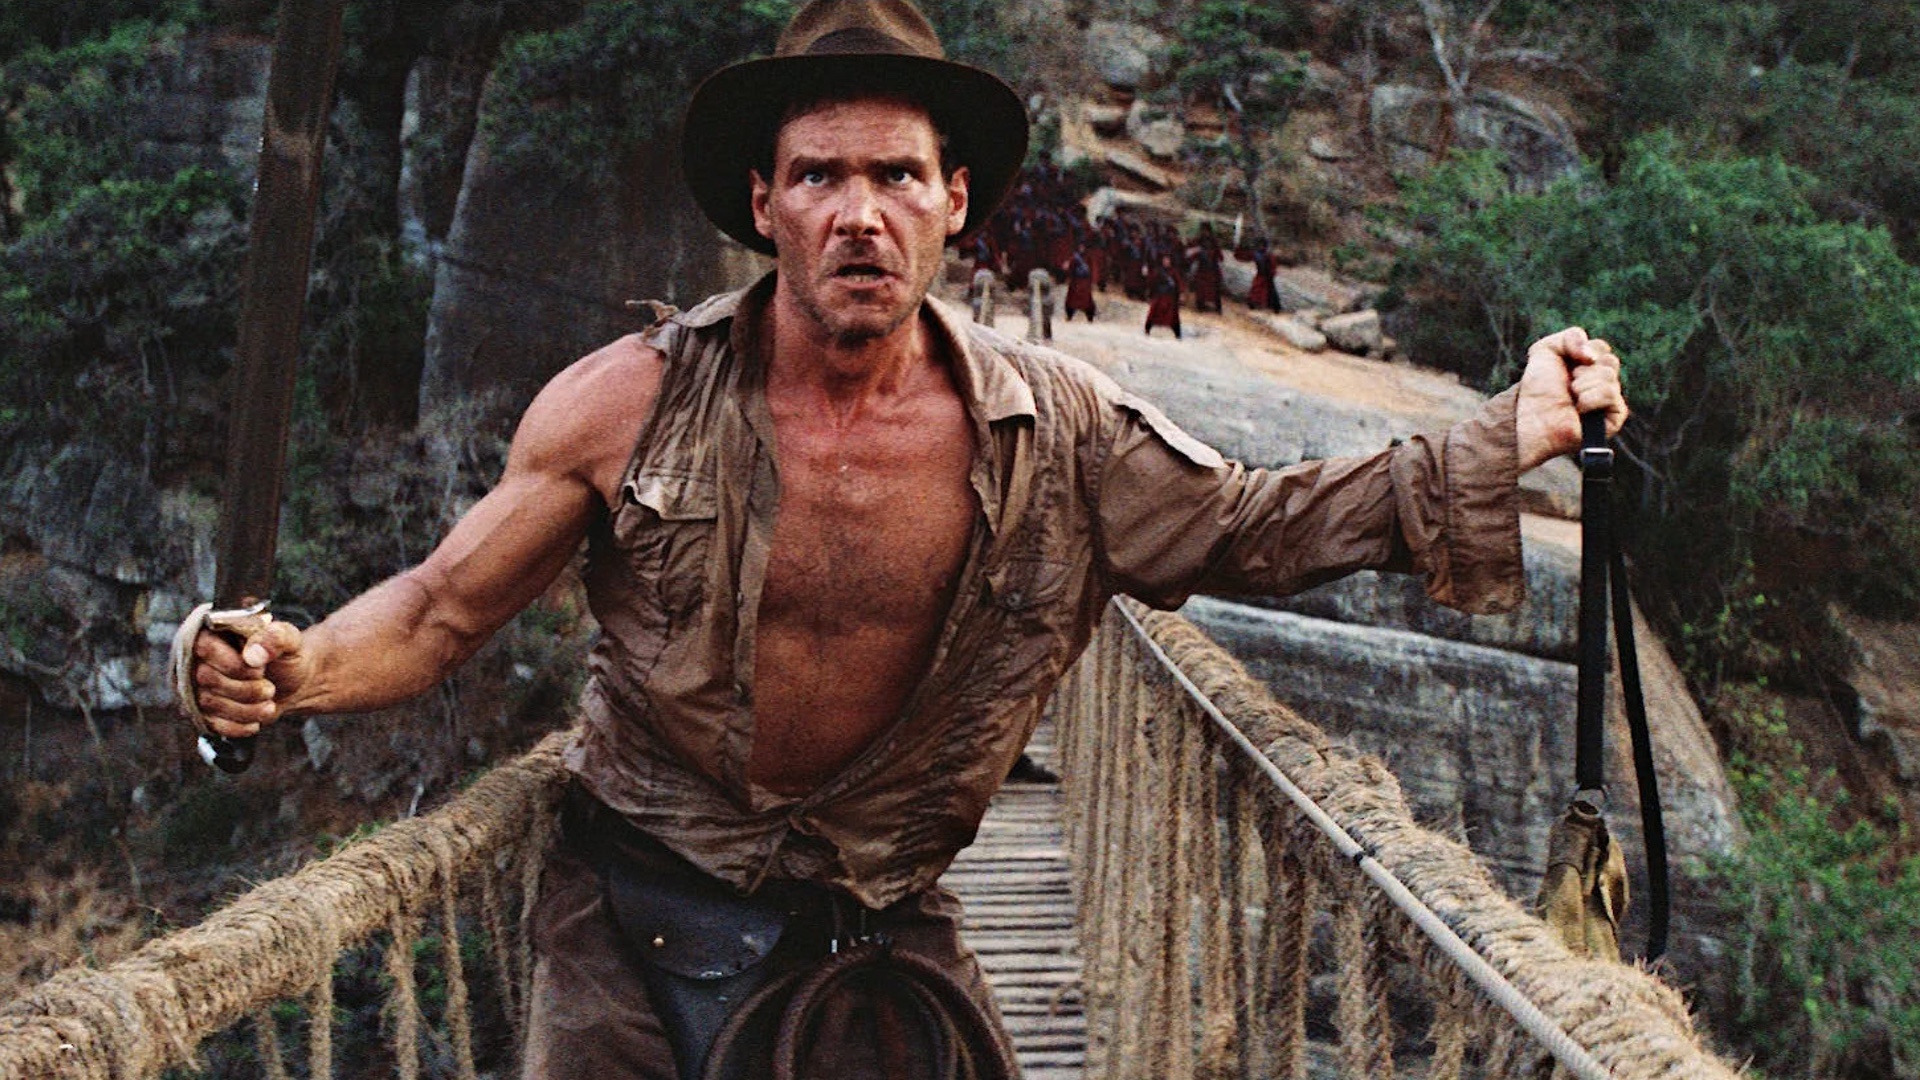 Harrison Ford (Indiana Jones): The Kingdom of the Crystal Skull, Soviet agents kidnap American archeologist and his partner George "Mac" McHale. 1920x1080 Full HD Background.